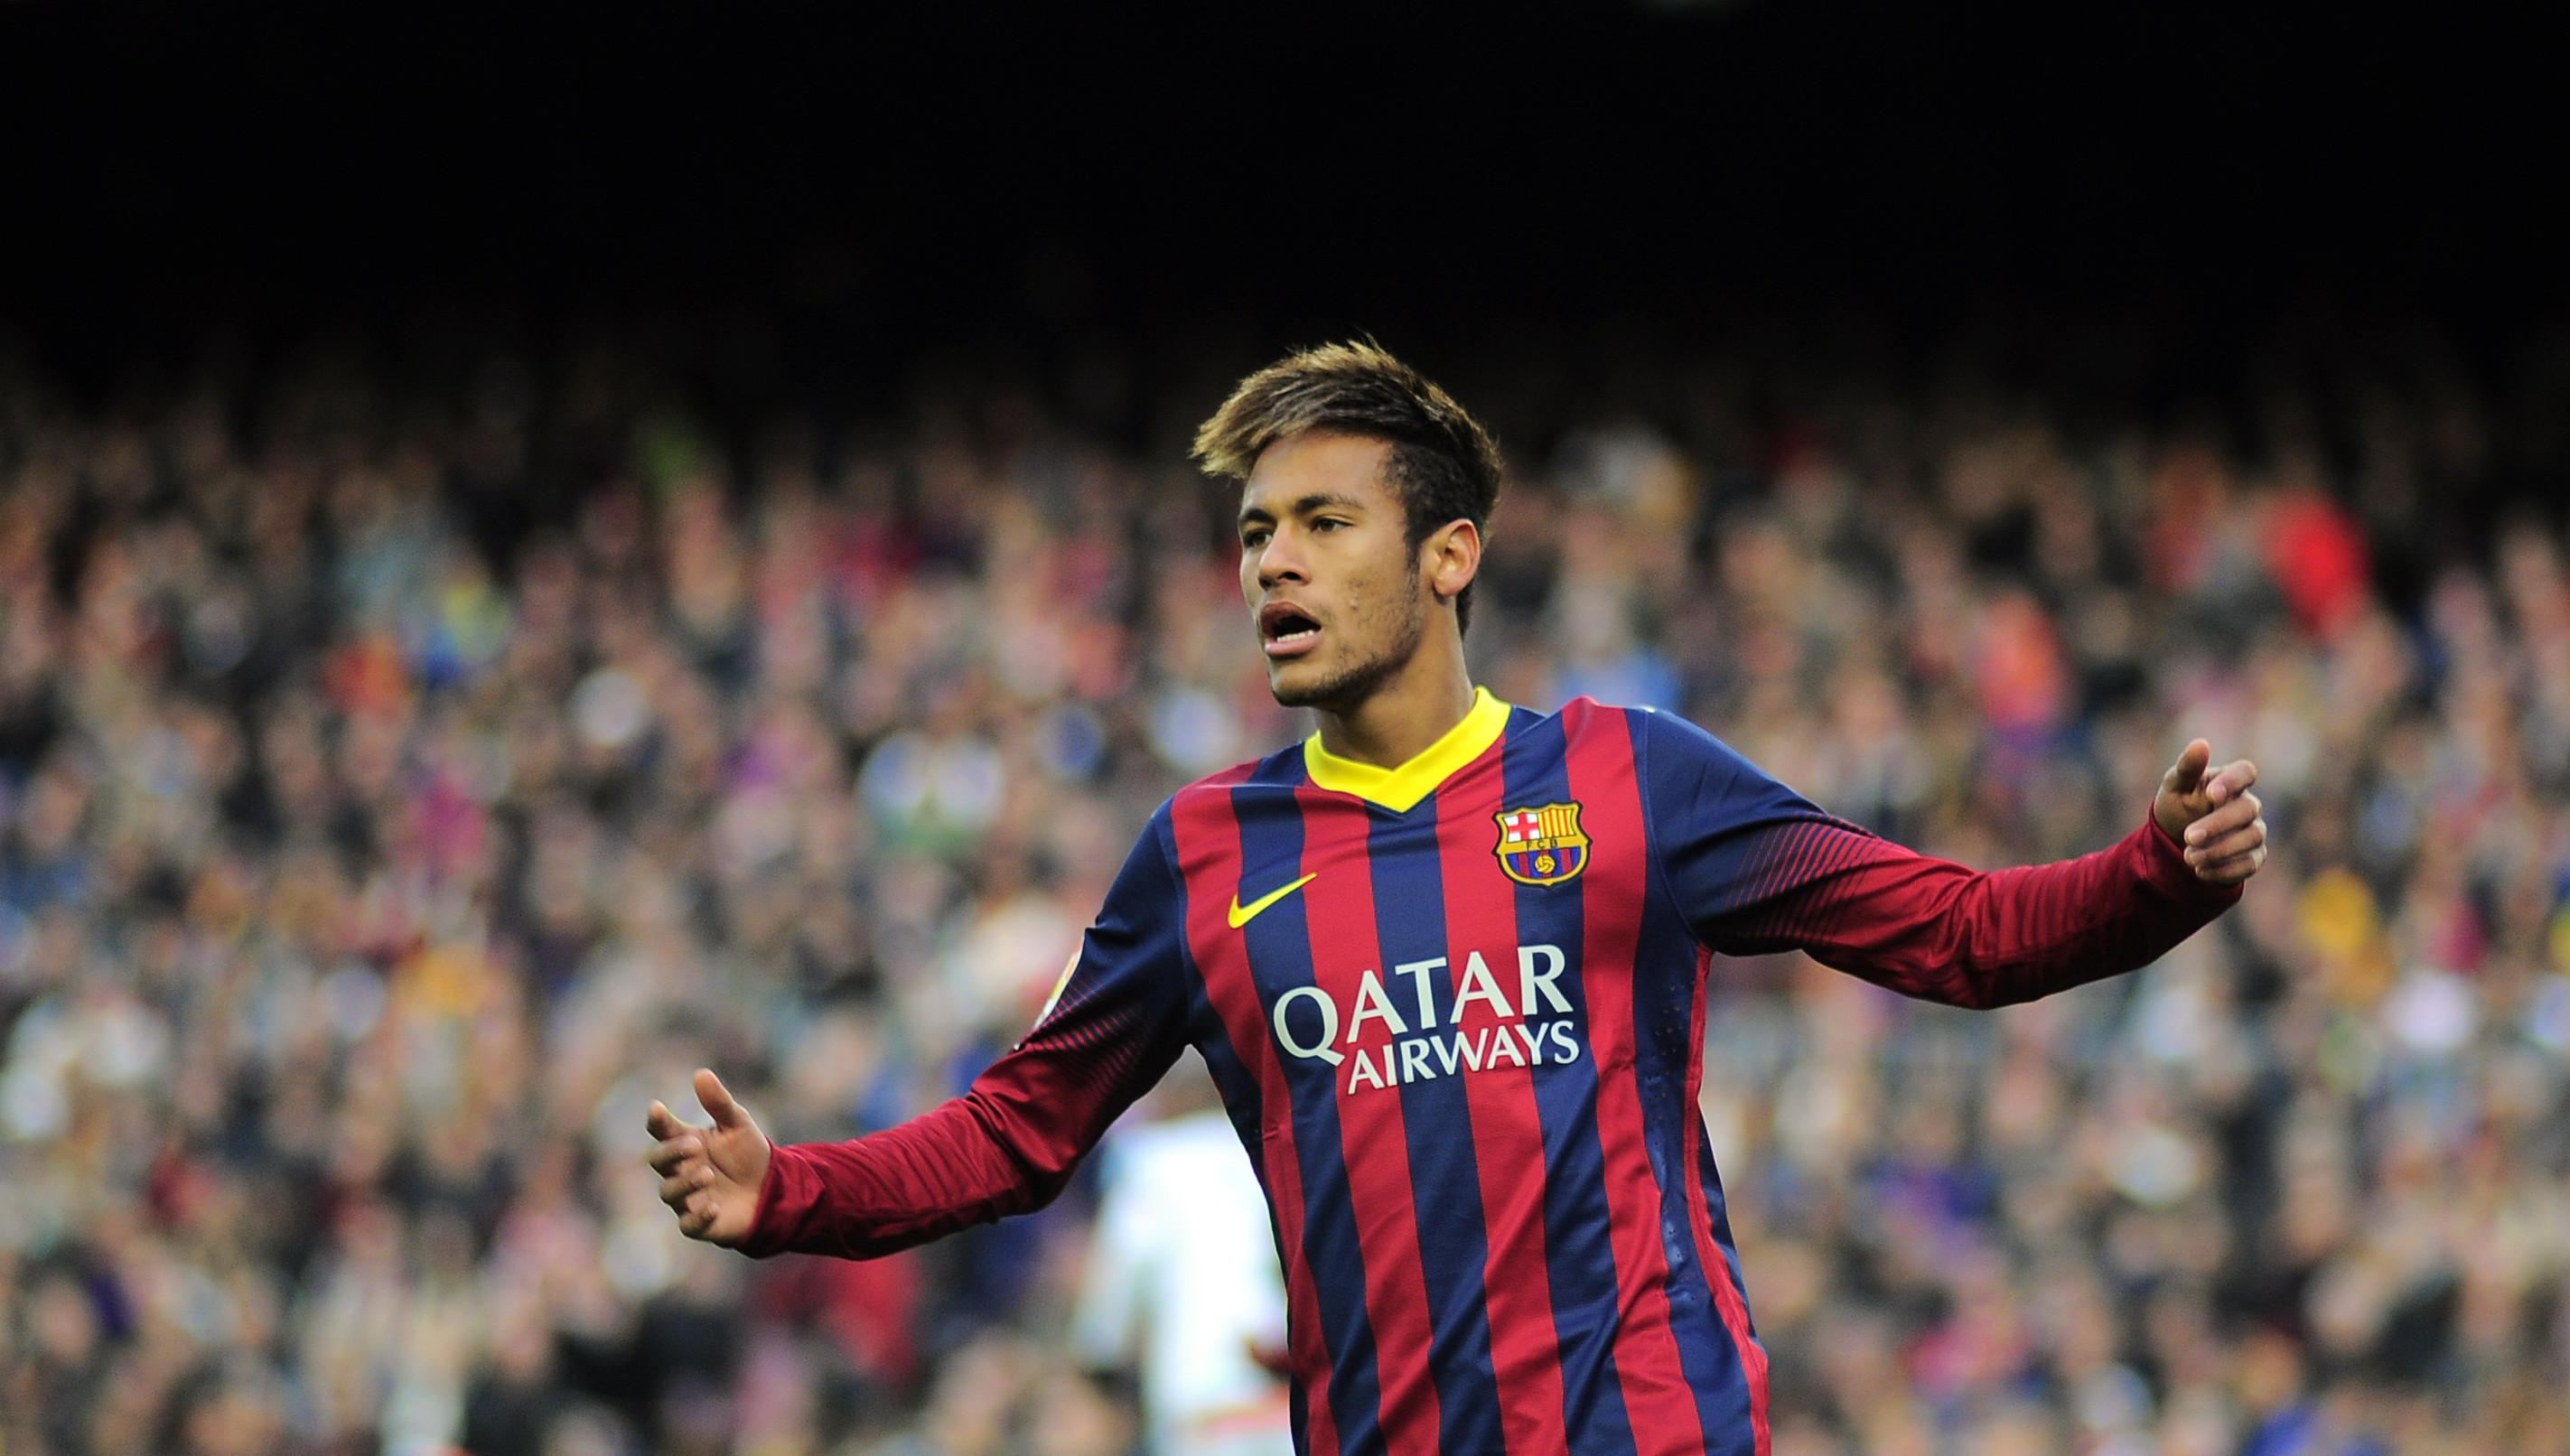 Neymar Wallpapers Pictures Images